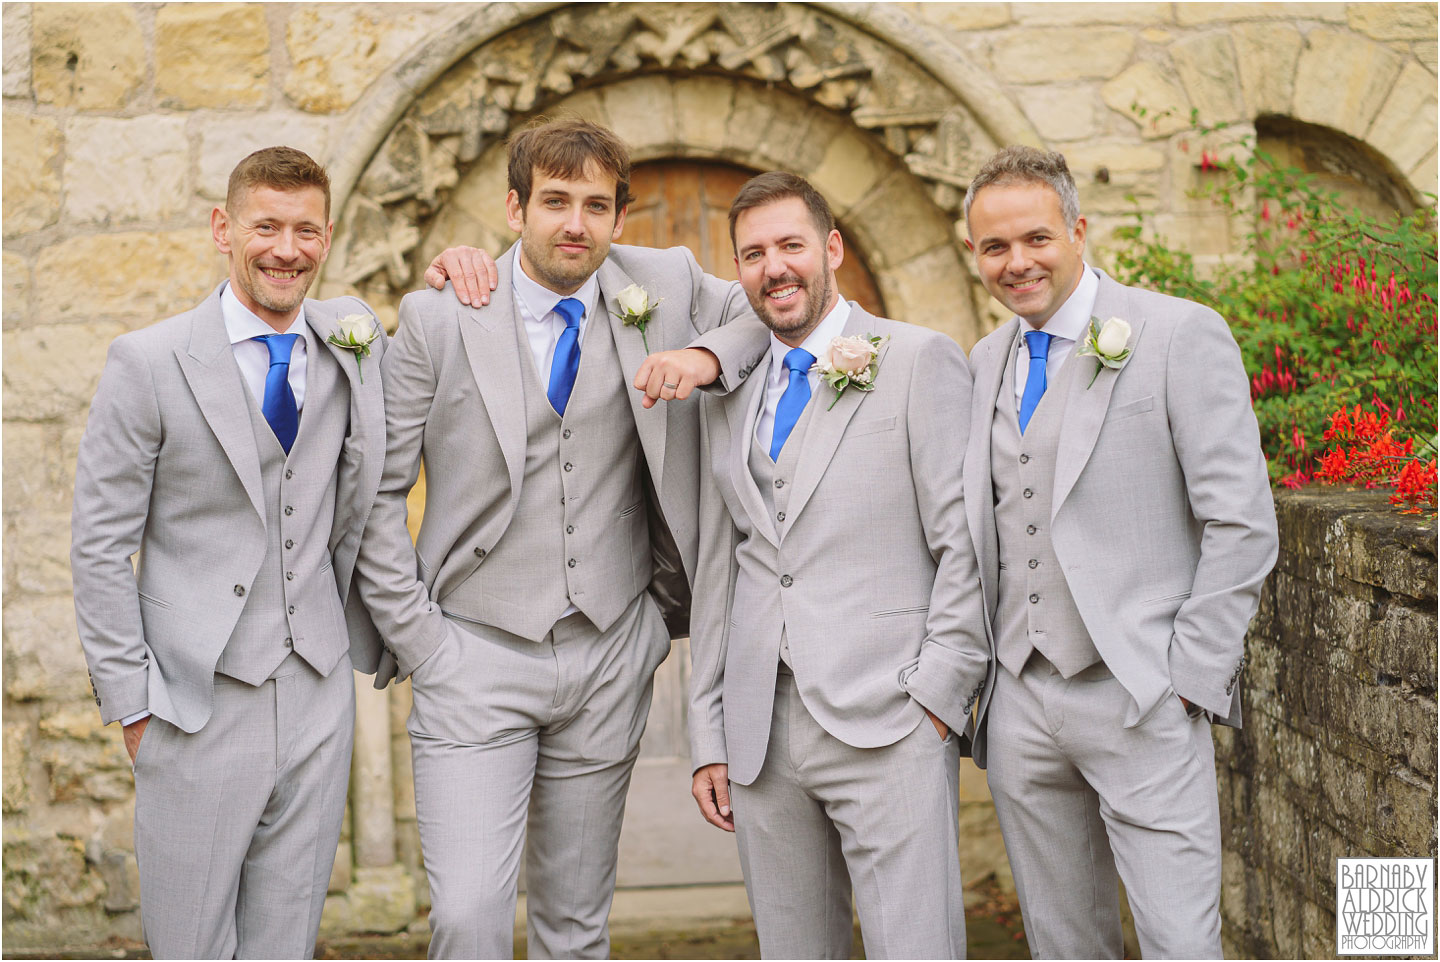 Groomsmen at Priory Cottages, Priory Cottages Wedding Photographer, Priory Barn Yorkshire Wedding Photographer, Priory Cottages Wedding, Priory Farm and Cottages Wedding, Yorkshire Wedding Photographer